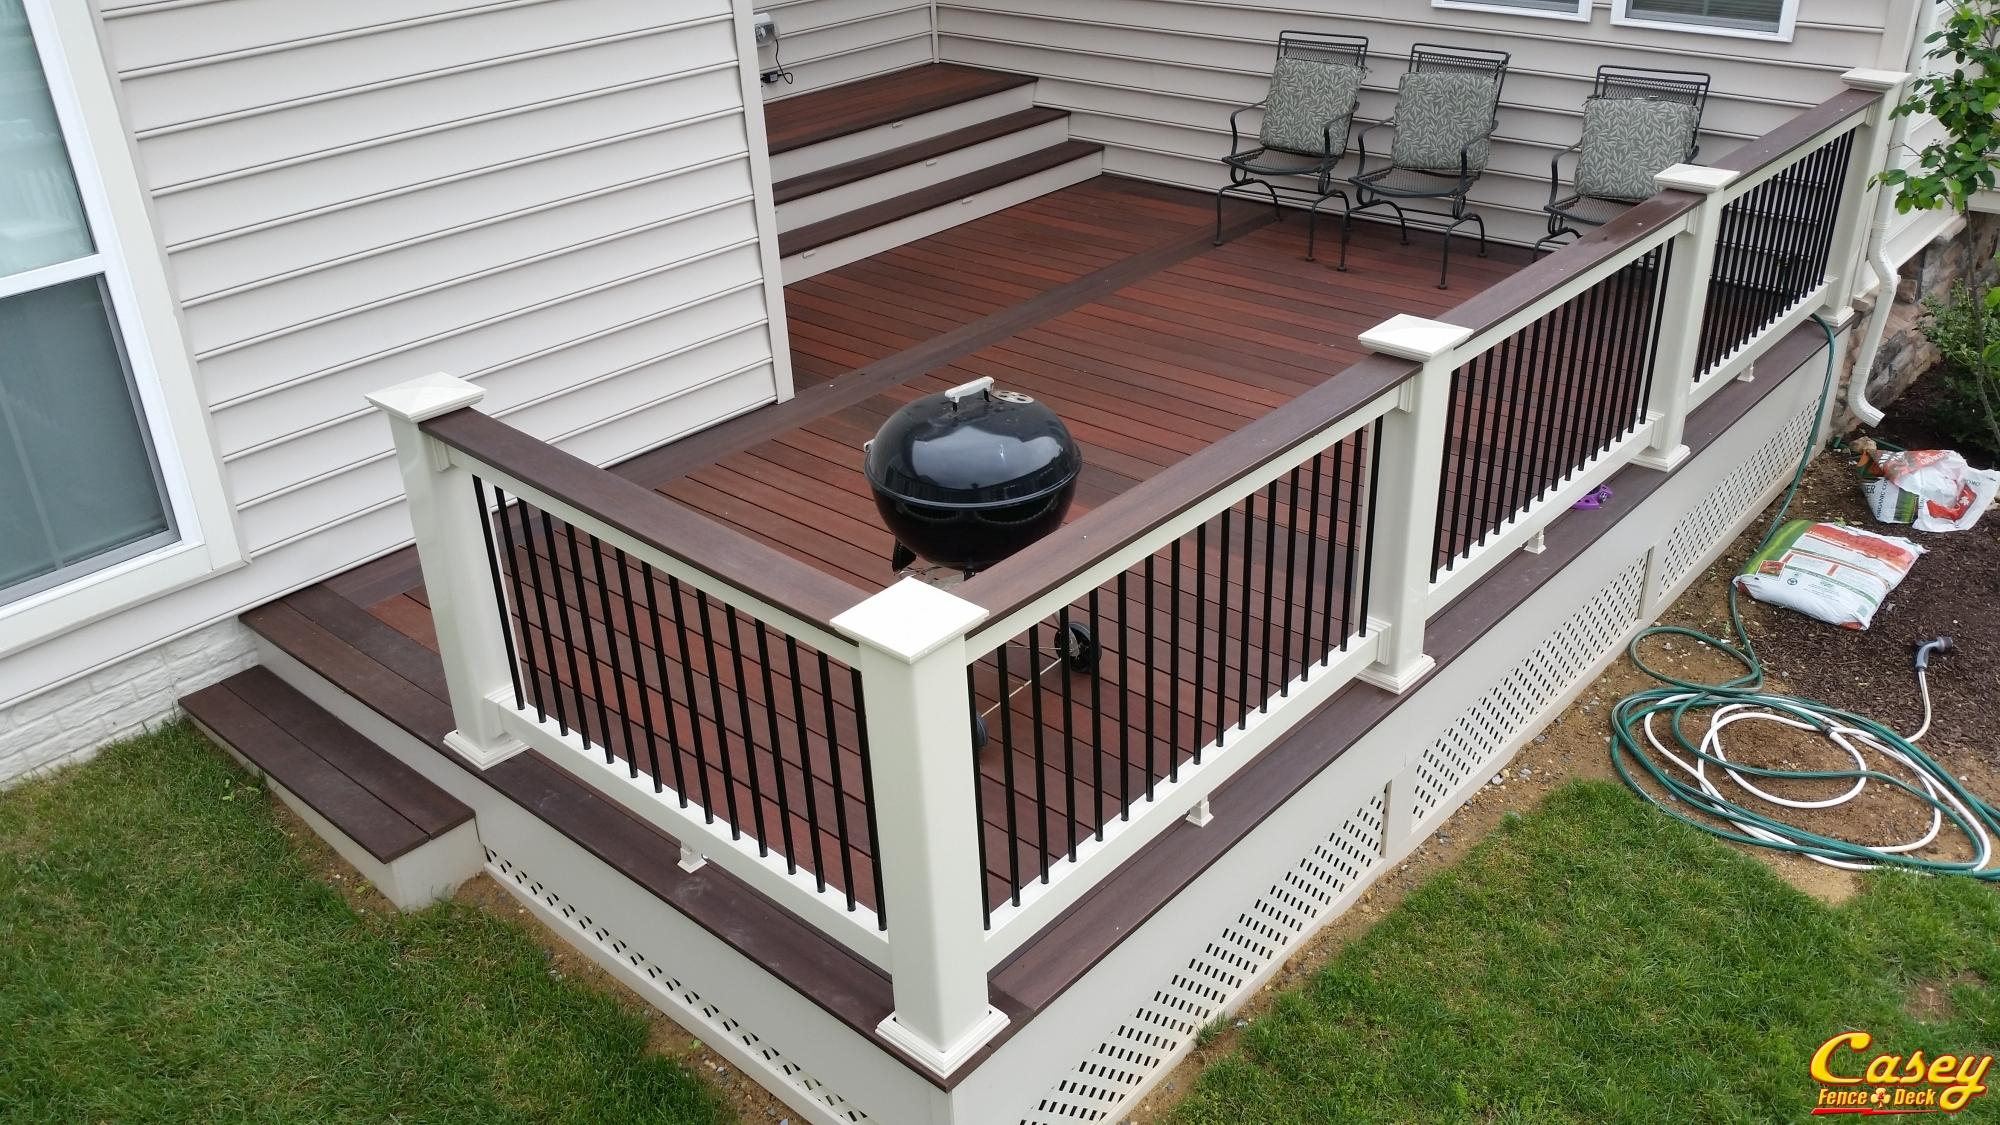 Decking And Board Patterns Casey Fence And Deck Llc intended for sizing 2000 X 1125